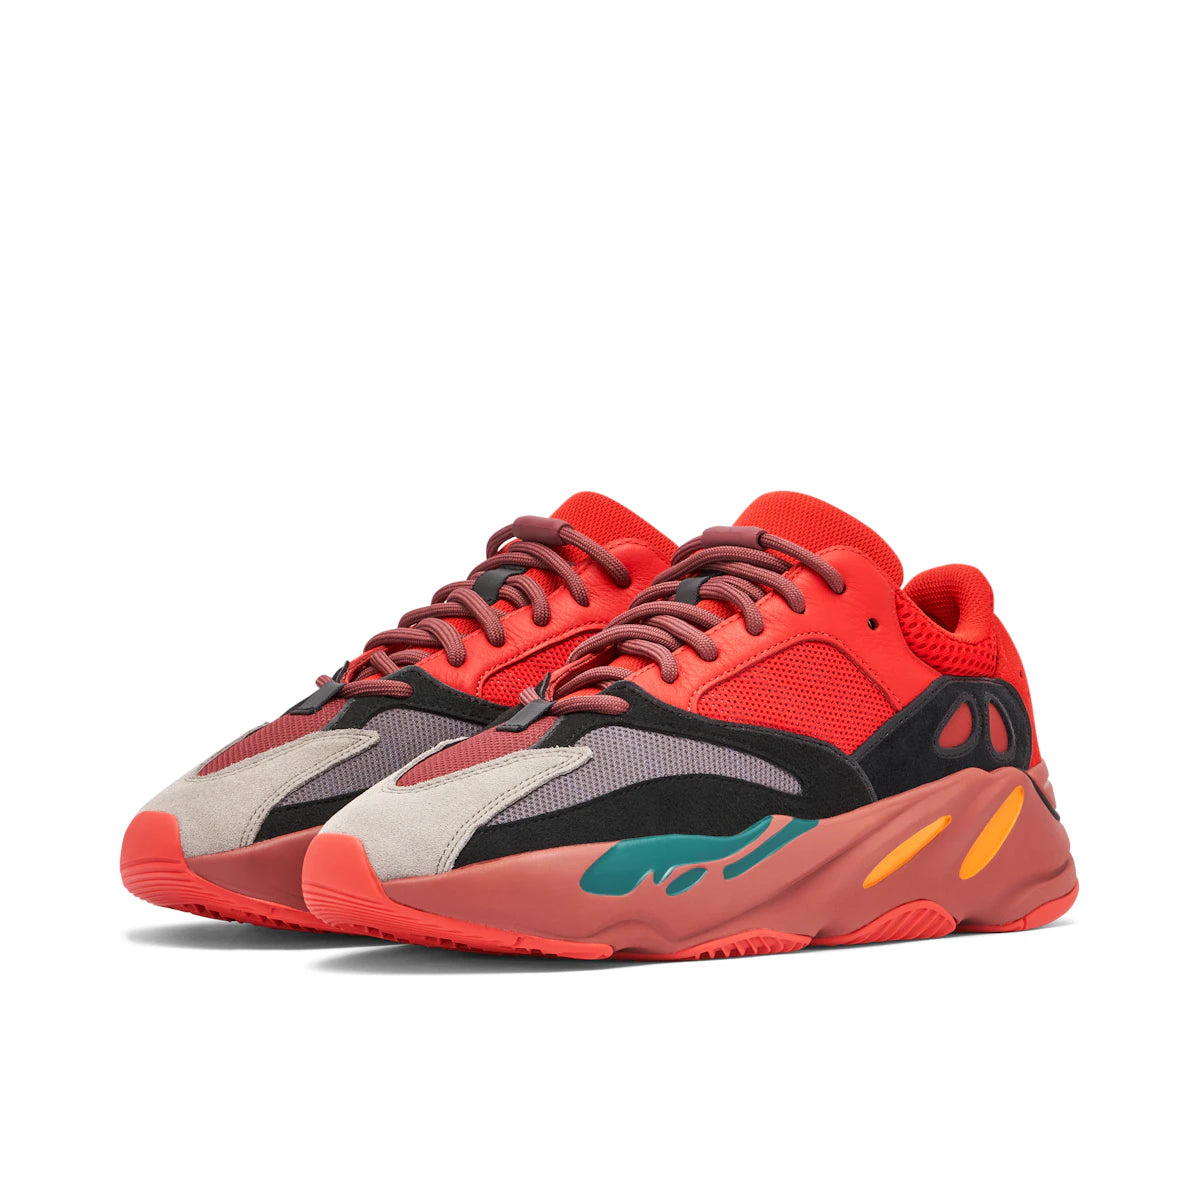 adidas Yeezy Boost 700 Hi-Res Red by Yeezy from £300.00